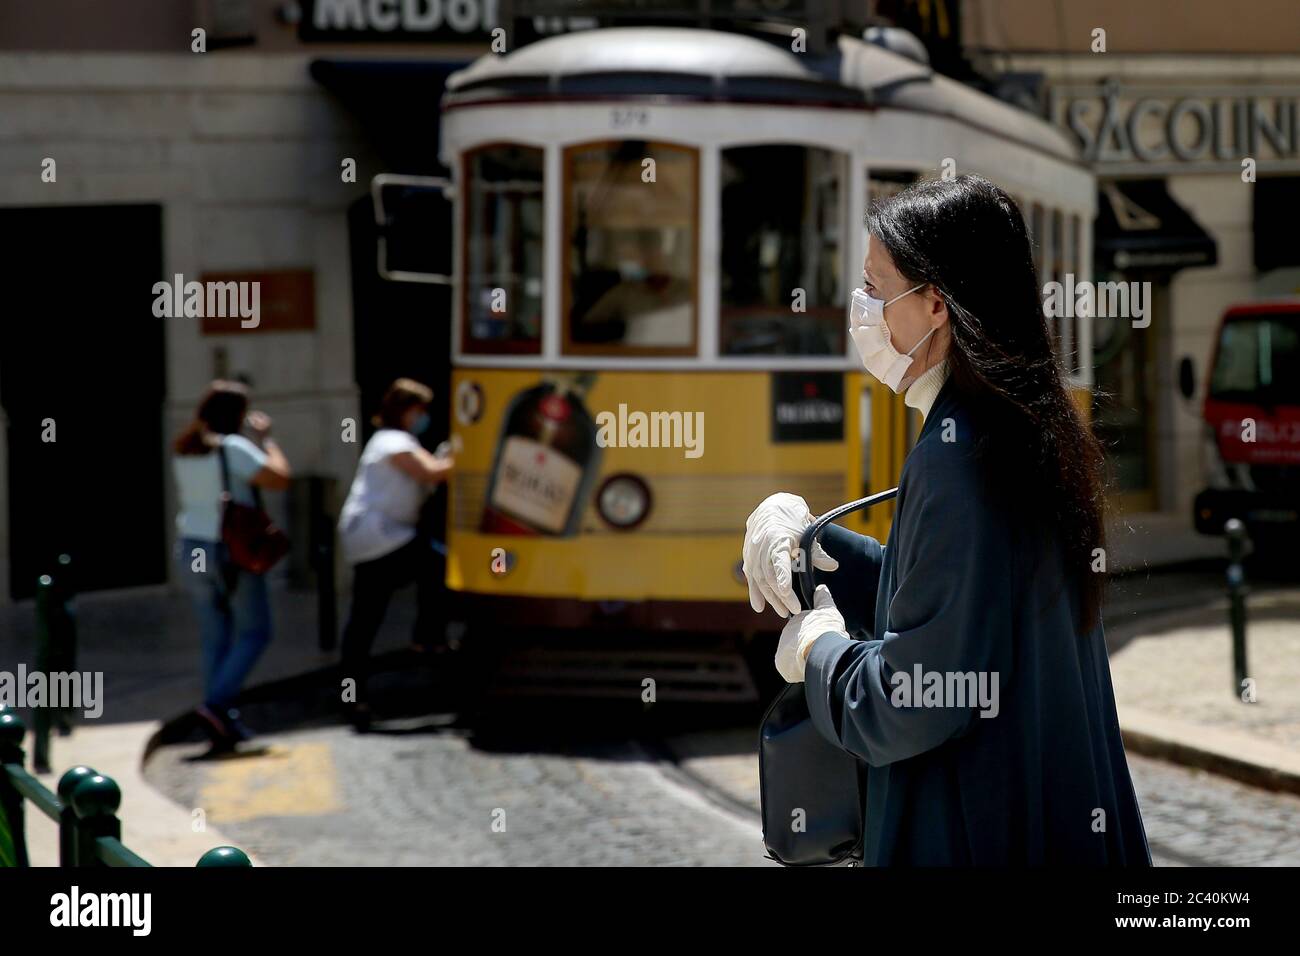 June 23, 2020, Lisbon, Portugal: A man wearing a face mask walks in Lisbon, Portugal, on June 23, 2020, during the COVID-19 Coronavirus pandemic. The Government applies today new mandatory confinement measures to the whole Lisbon metropolitan area, due to a significant increase in Covid-19 cases in recent weeks. Among the main restrictions is the return of the ban on gatherings with more than ten people, the strengthening of the supervision of shopping centres and the general closure of stores at 20:00, with the exception made to restaurants for meal service. (Credit Image: © Pedro Fiuza/ZUMA Stock Photo